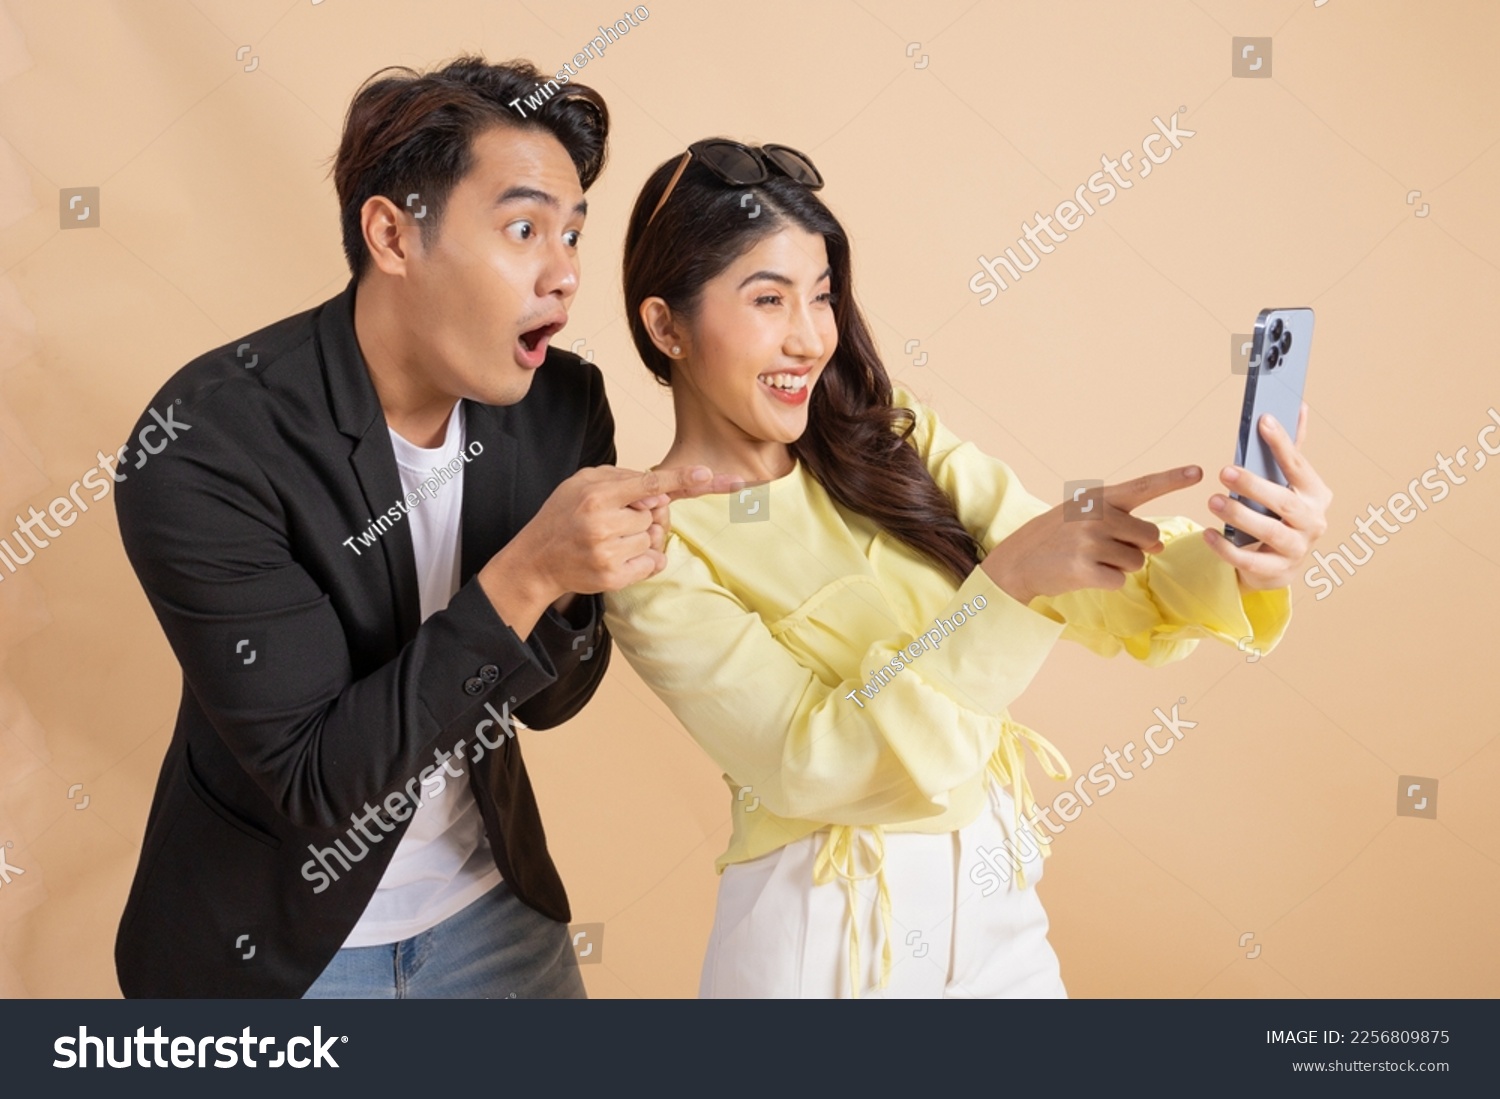 Shocked excited Asian businessman along with happy smiling woman pointing finger at smart phone over beige studio background. Man in white shirt and suit and woman in yellow top and white trousers. #2256809875